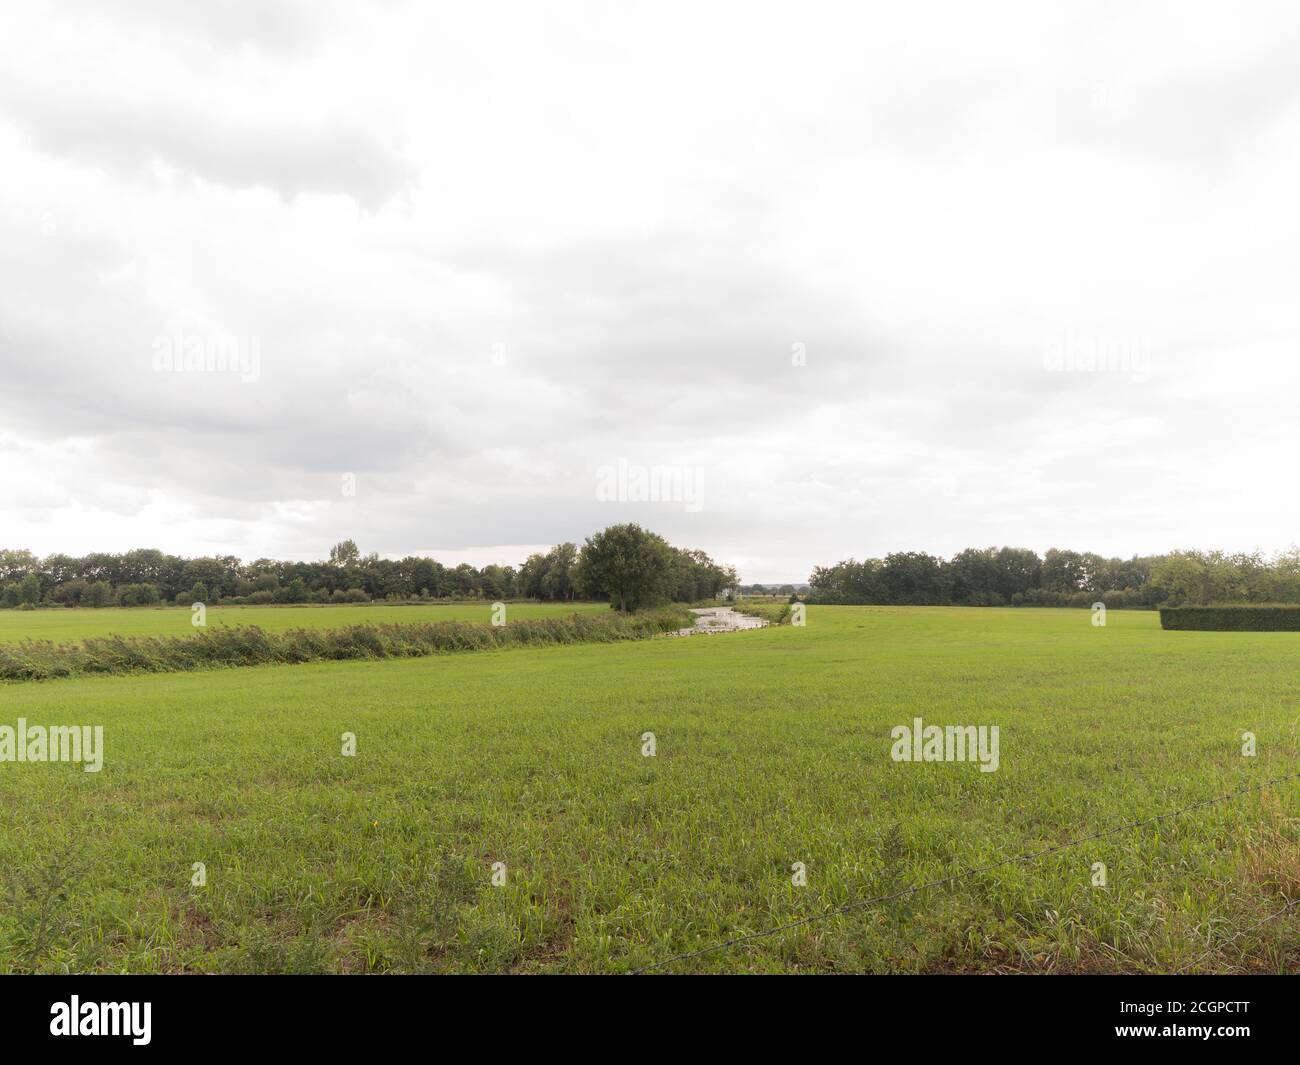 An agricultural field near Doetinchem, The Netherlands Stock Photo